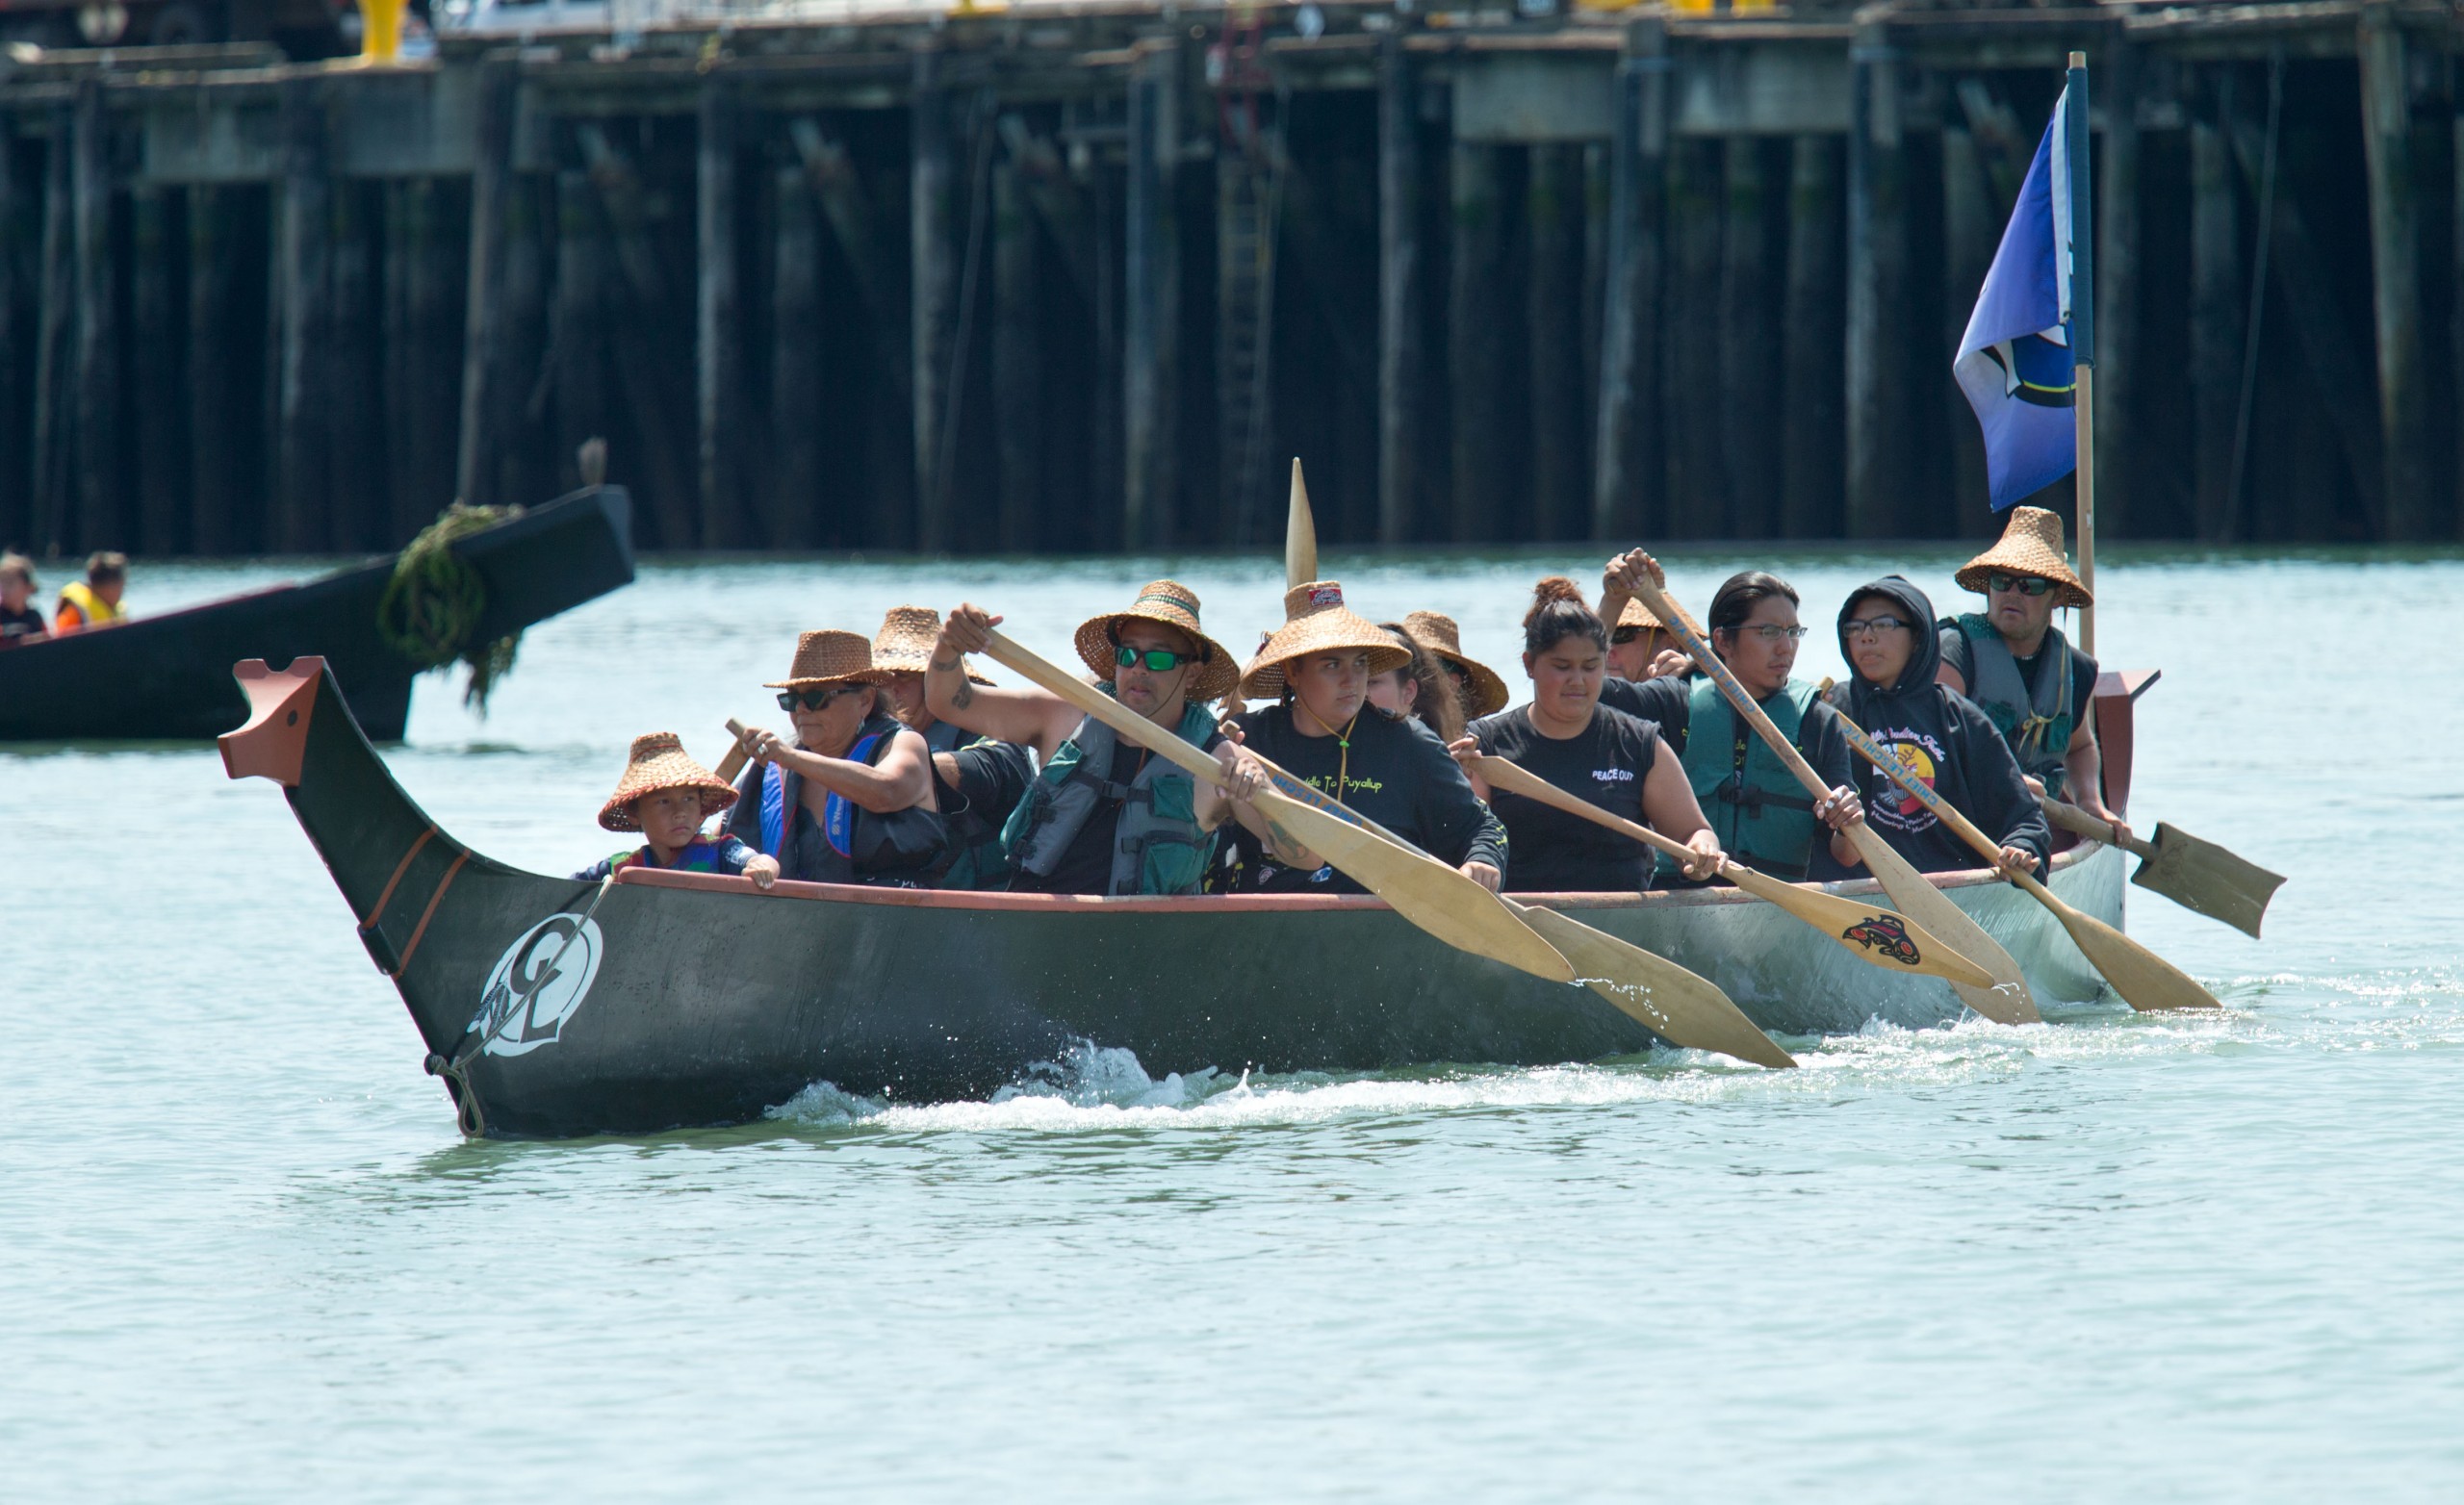 Puyallup (Chief Leschi) tribal members row to shore in their canoe, Spirit of the Wolf Protects, on Saturday, July 28. (Photo by John Froschauer/PLU)